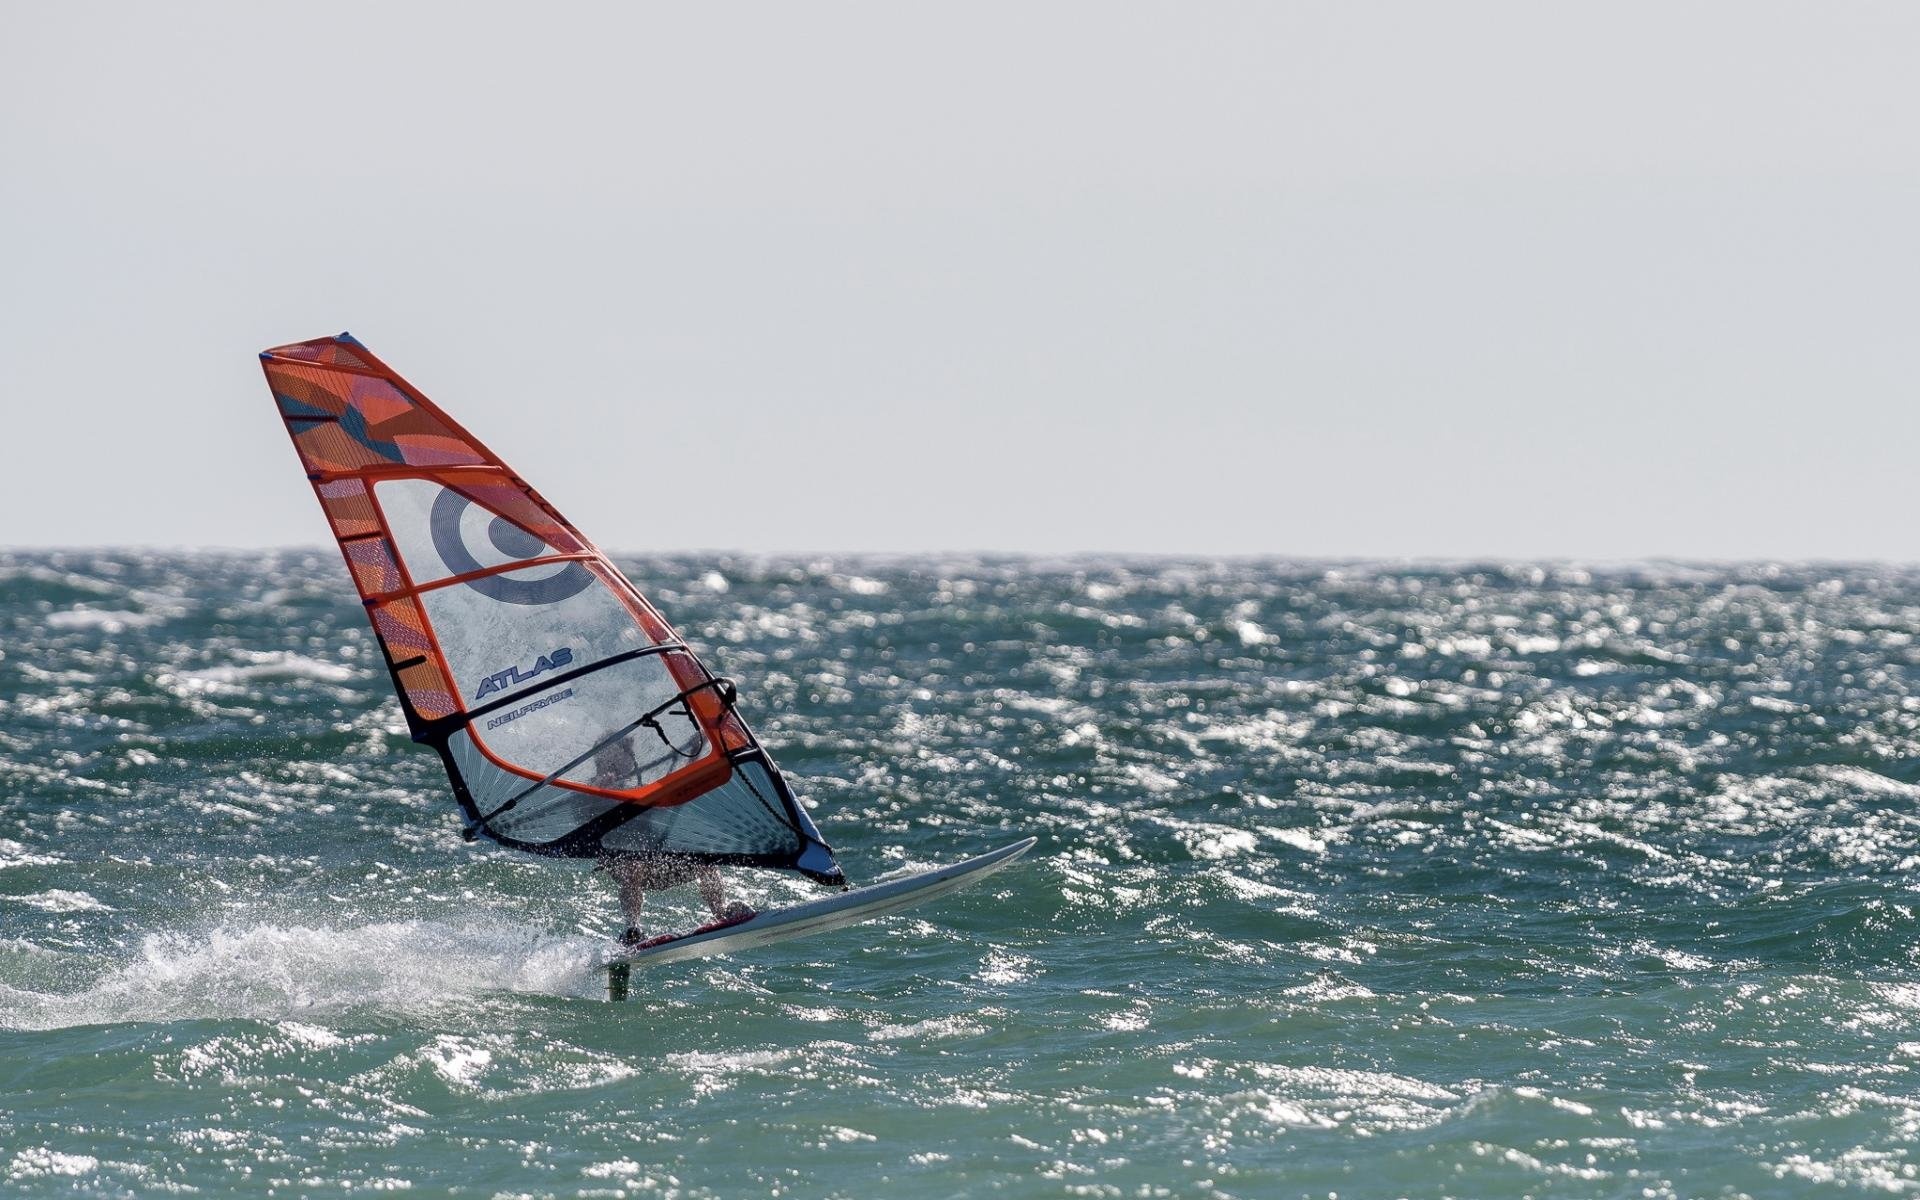 Windsurfing: Windsurfing Events 2022, Freestyle Waves with Atlas, Atlas Sails. 1920x1200 HD Wallpaper.